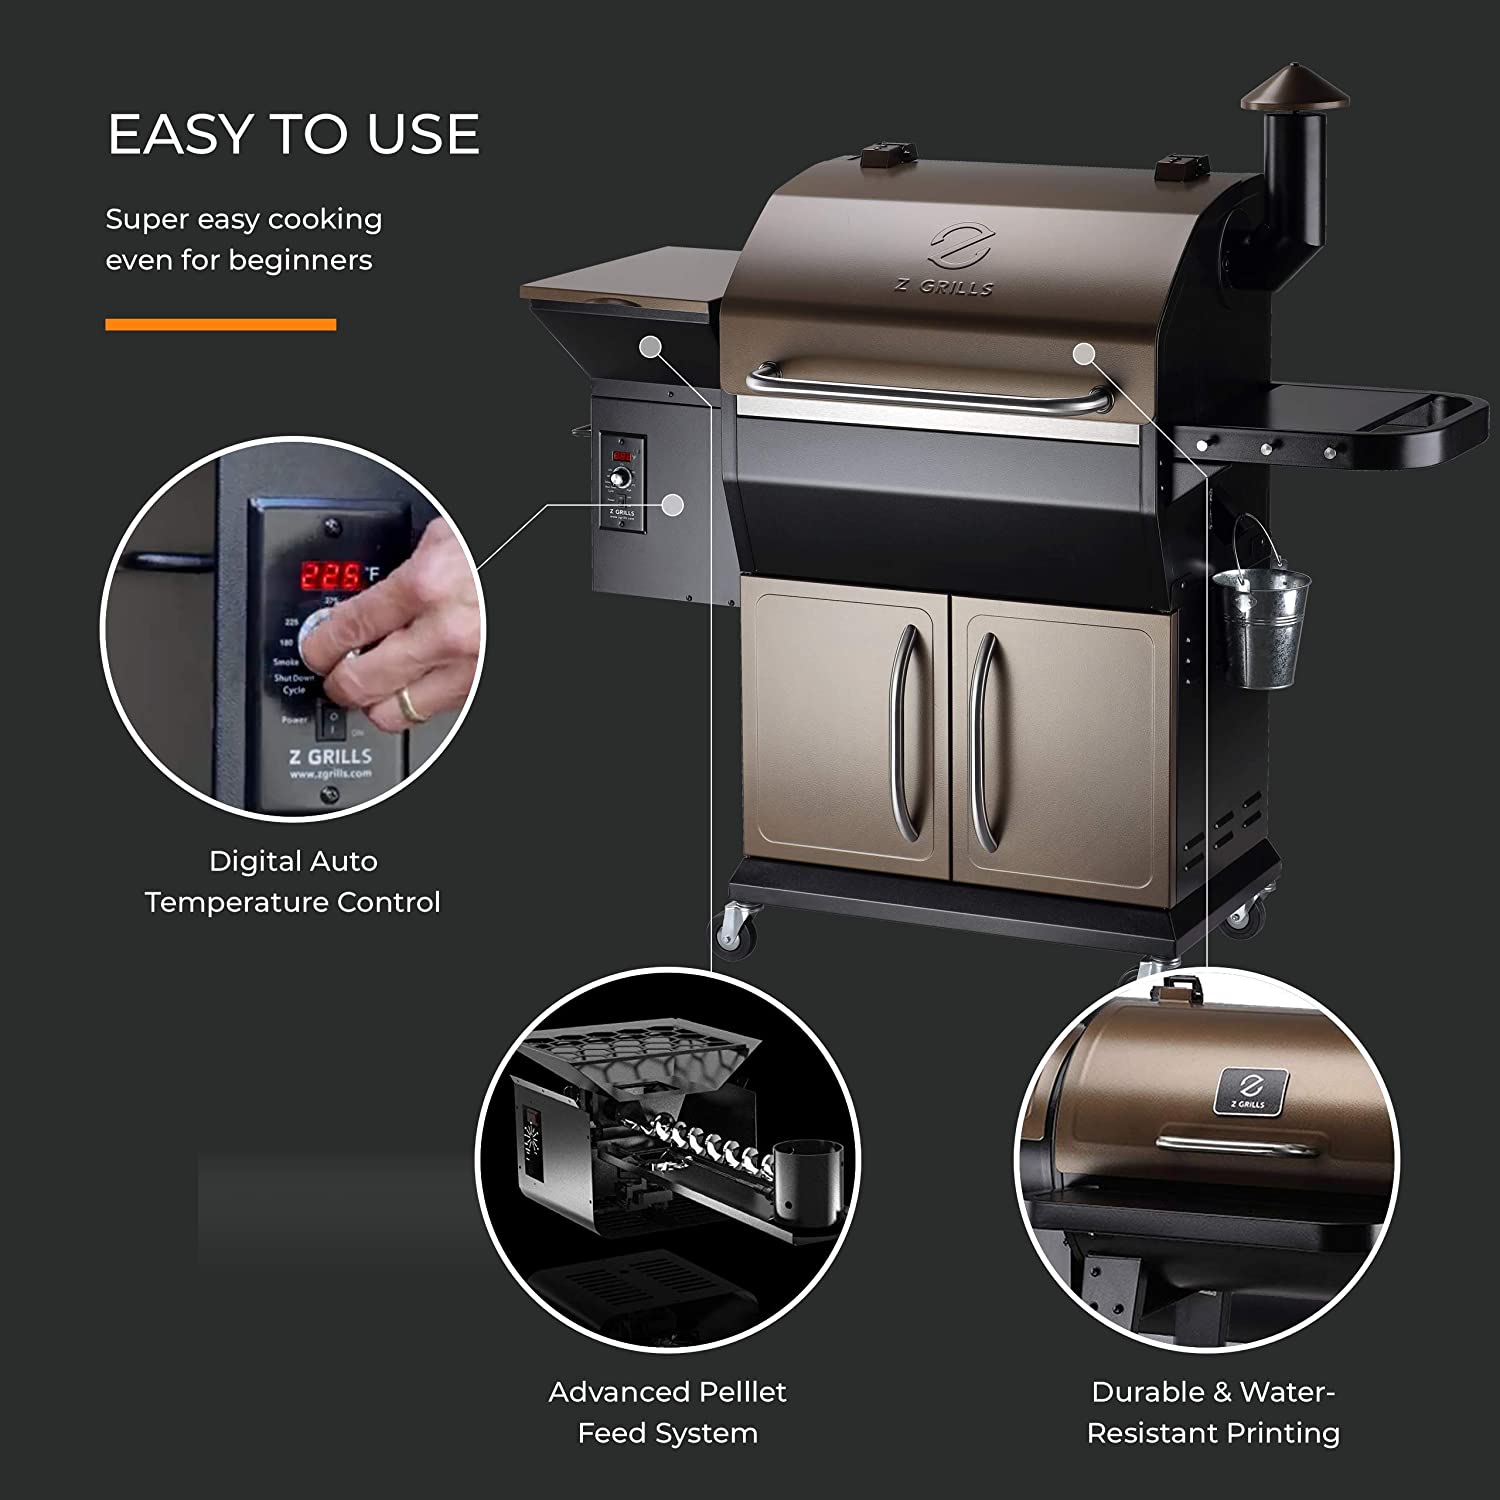 Z GRILLS 1000D Smart Wood Pellet Grill 8 in 1 Outdoor BBQ Smoker 1060 SQ Inches Cooking Area with Cabinet Barbecue Grill Bronze - image 3 of 8